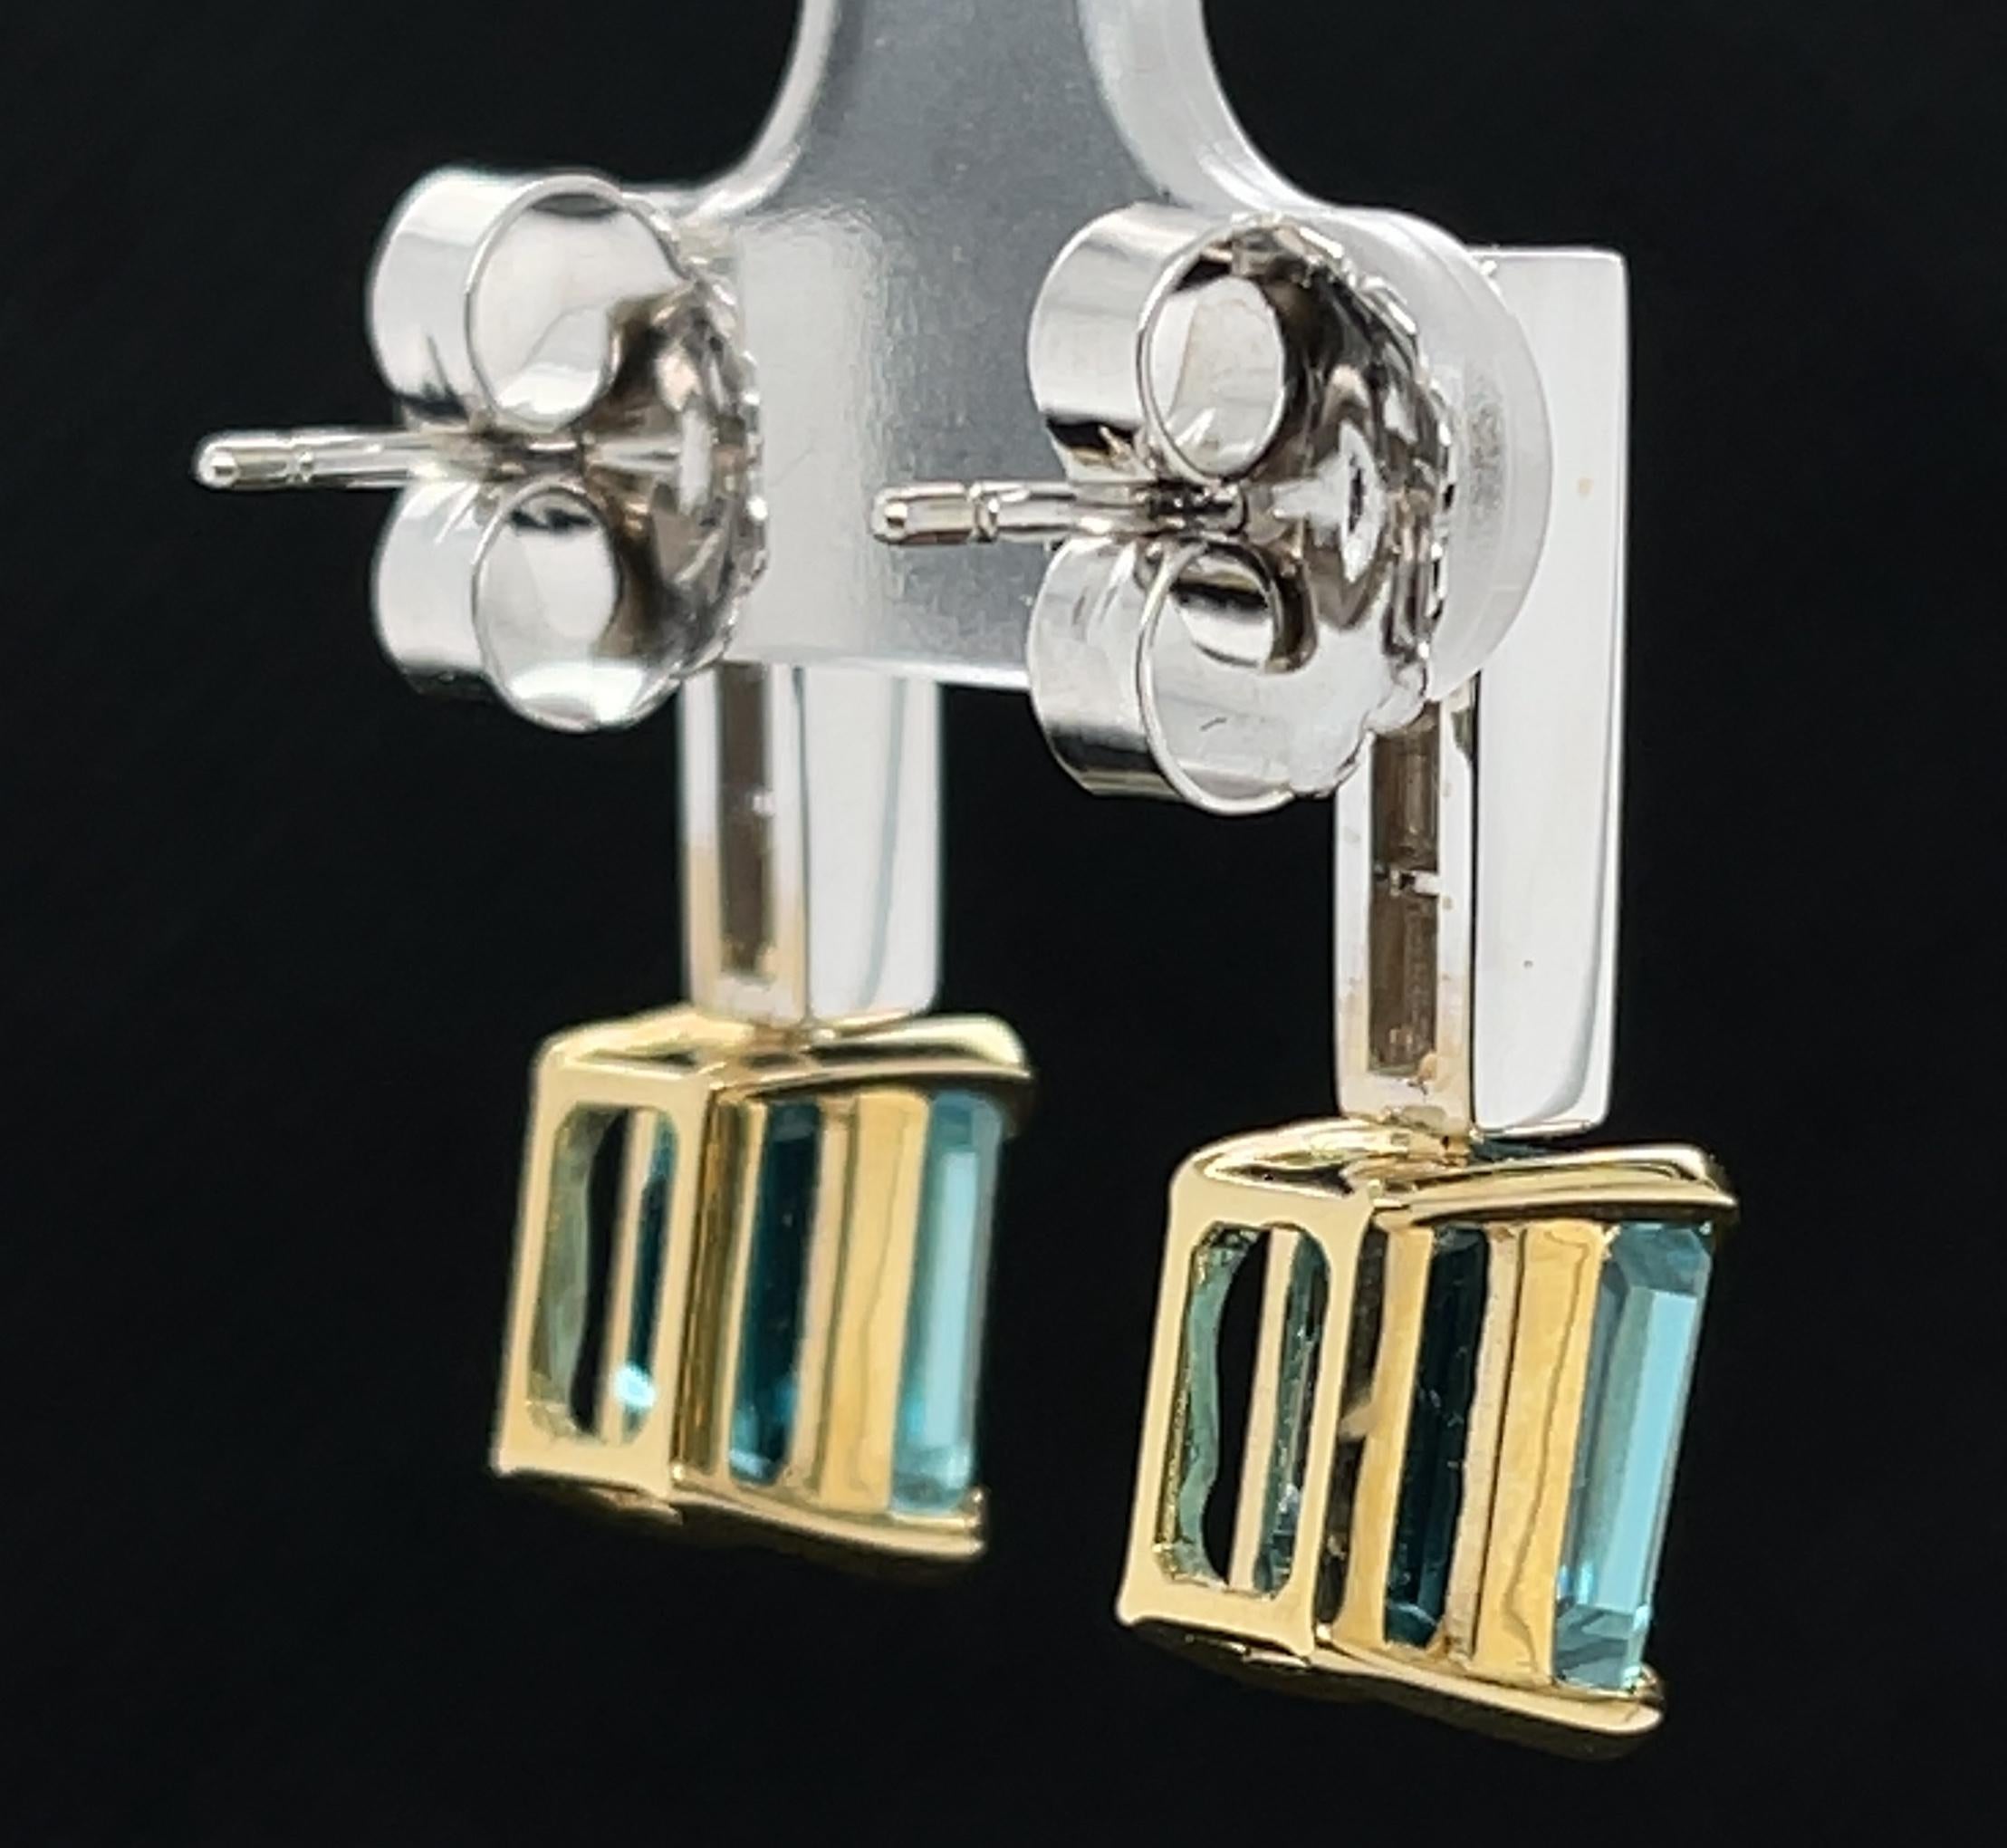 Emerald Cut Blue Zircon and Diamond Drop Earrings in 18k White Gold, 9.97 Carats Total For Sale